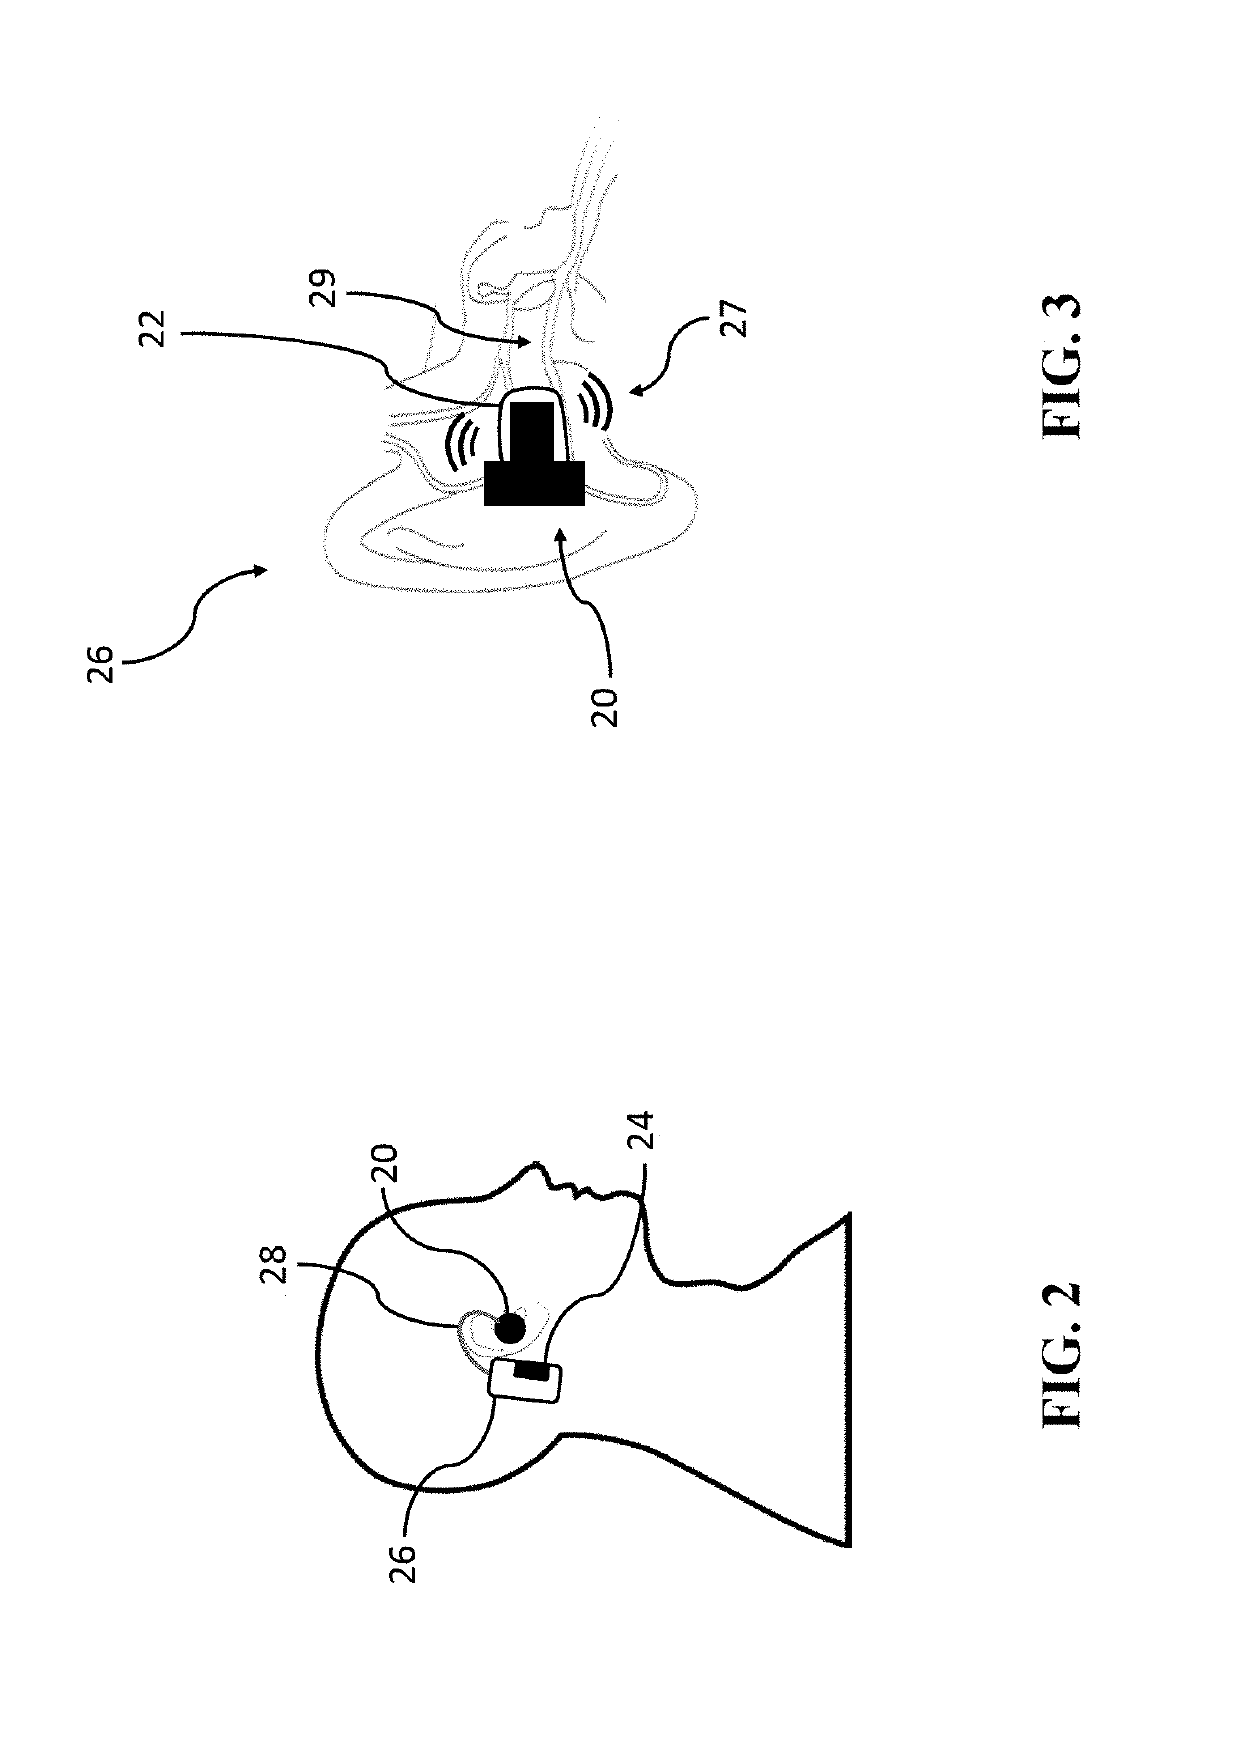 Ultrasonic hearing system and related methods